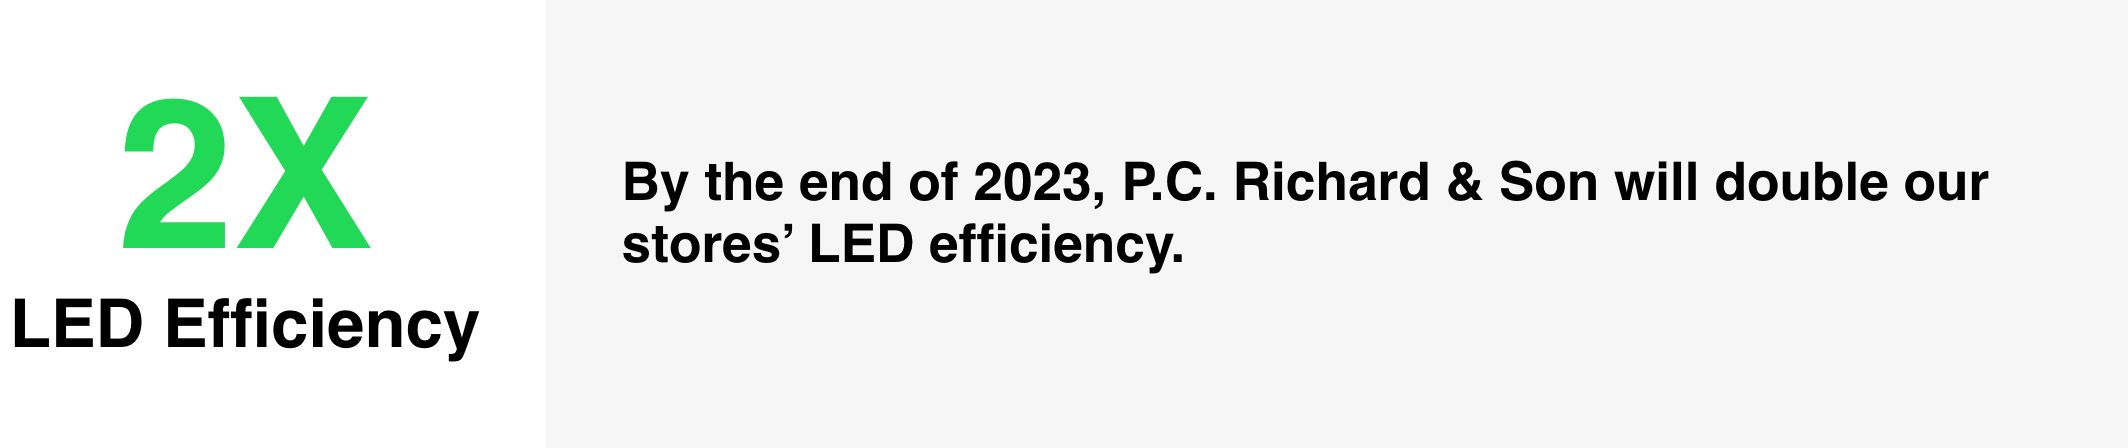 By the end of 2023, P.C. Richard & Son will double our stores' LED efficiency.